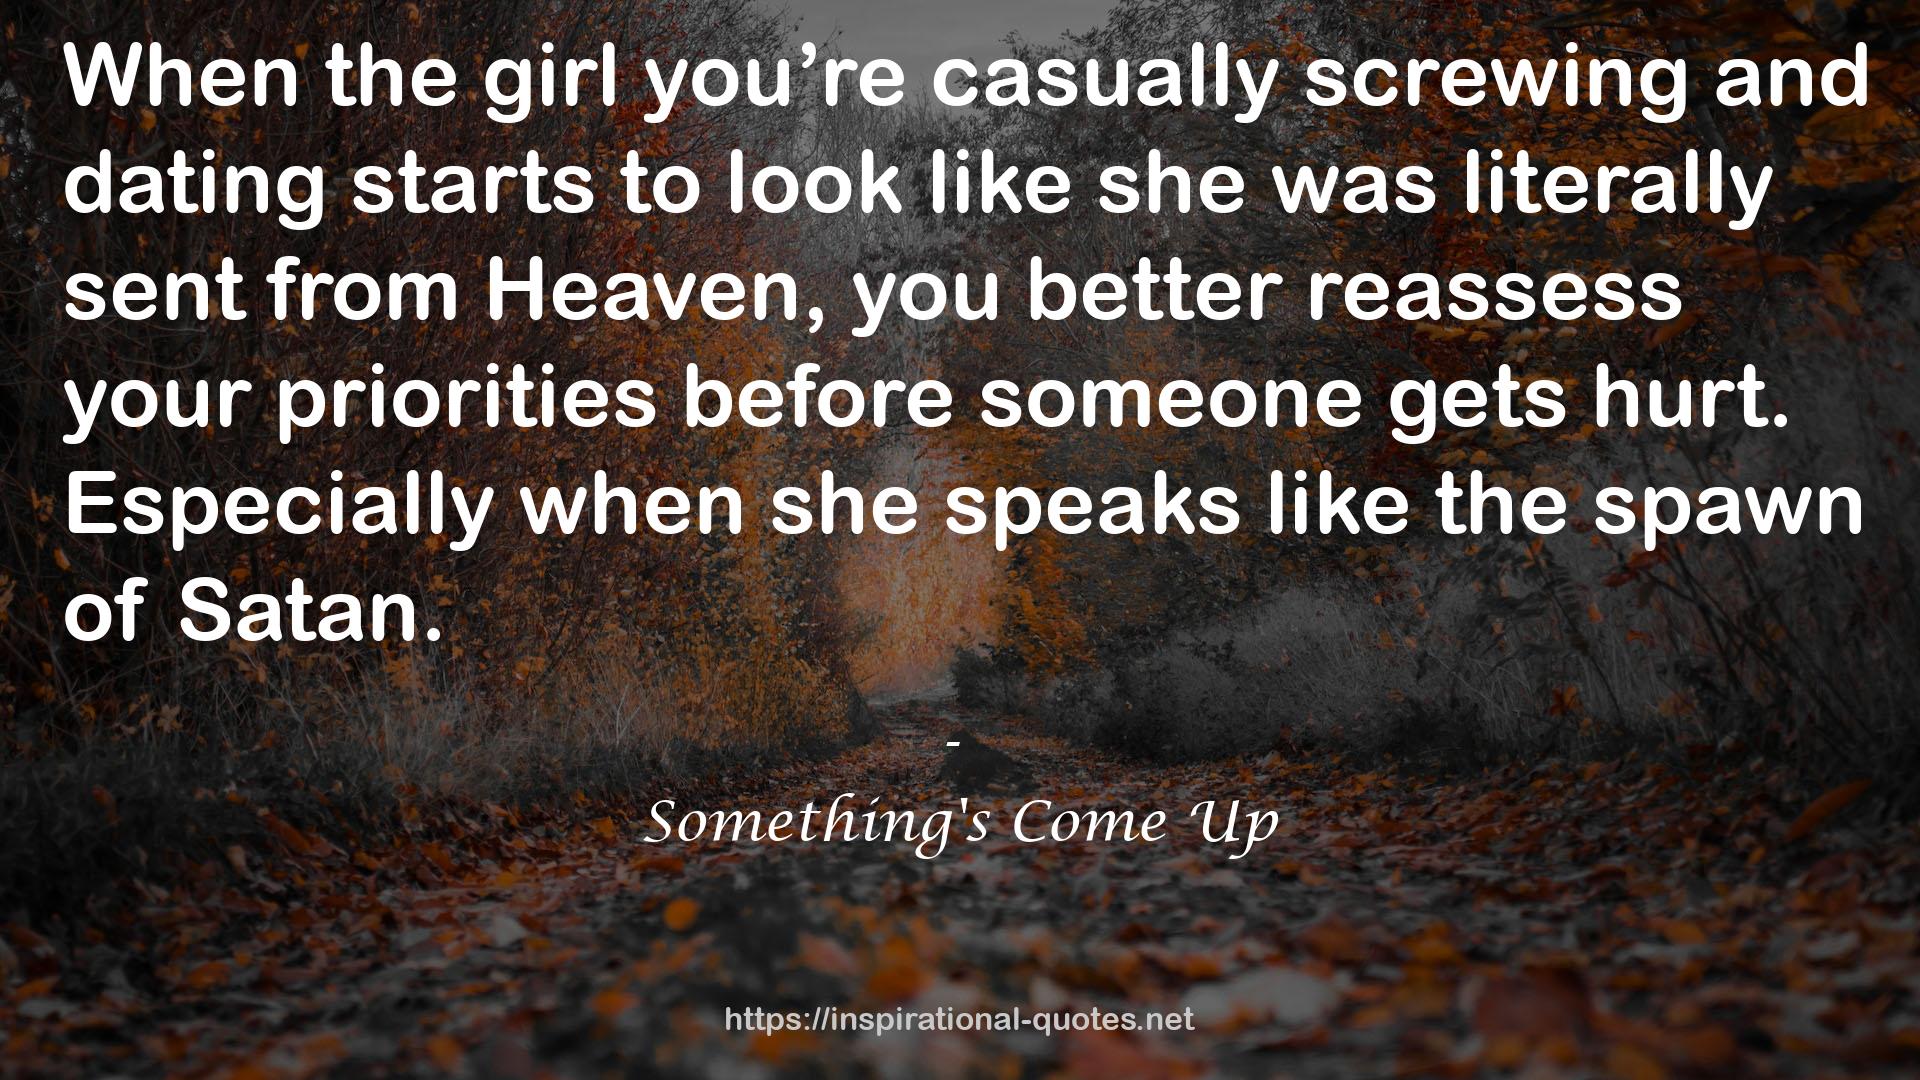 Something's Come Up QUOTES